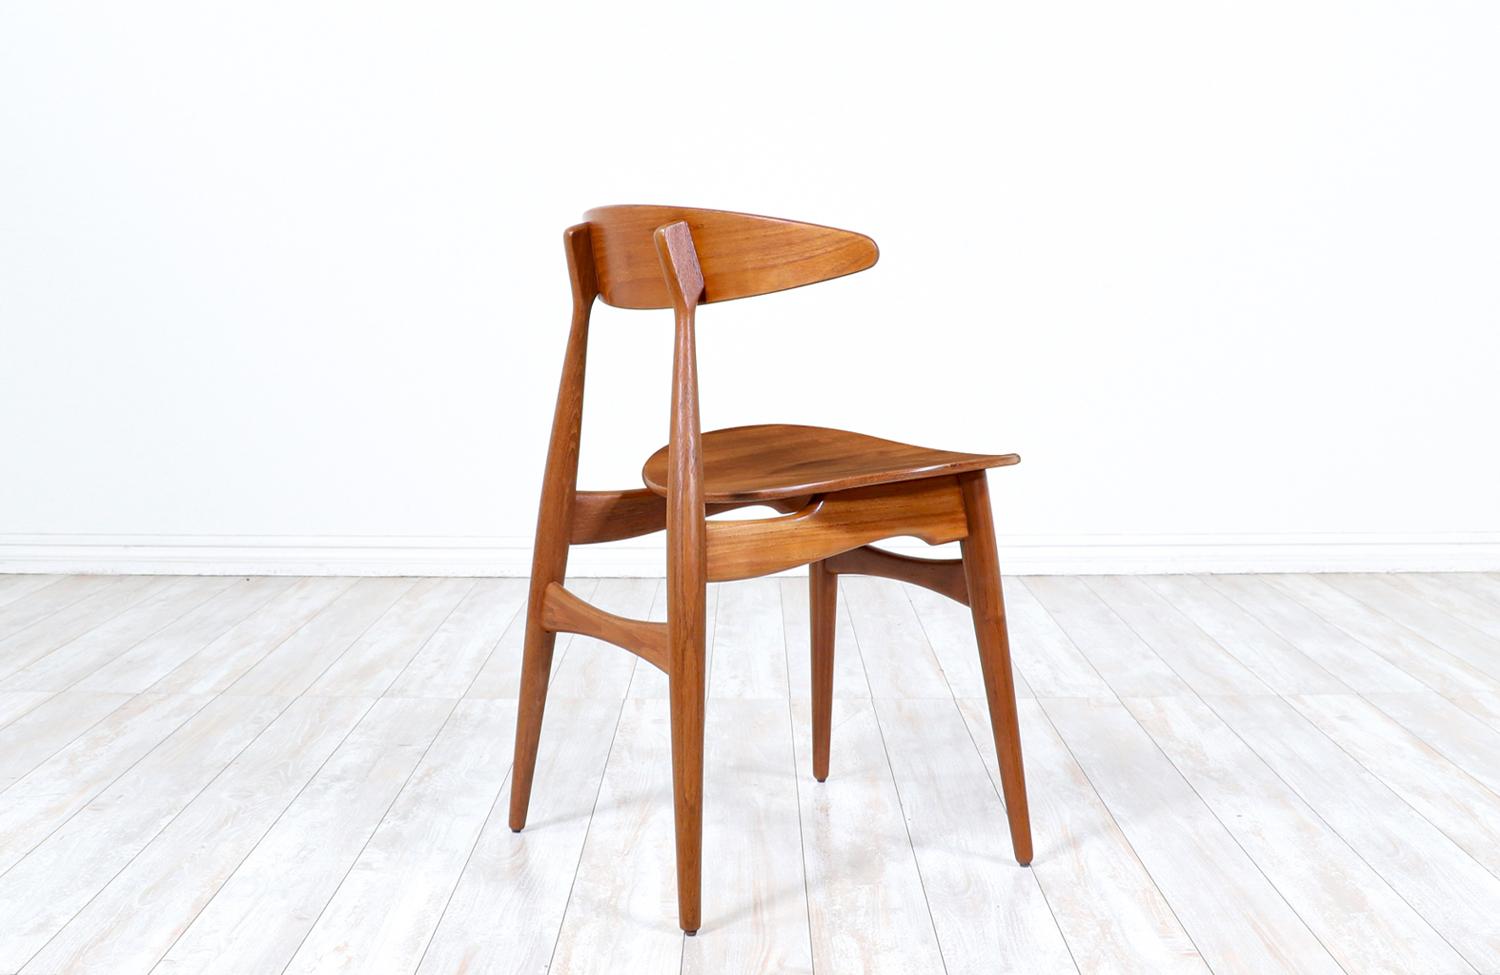 Expertly Restored - Hans J. Wegner CH-33 Teak Side Chair for Carl Hansen & Søn In Excellent Condition For Sale In Los Angeles, CA